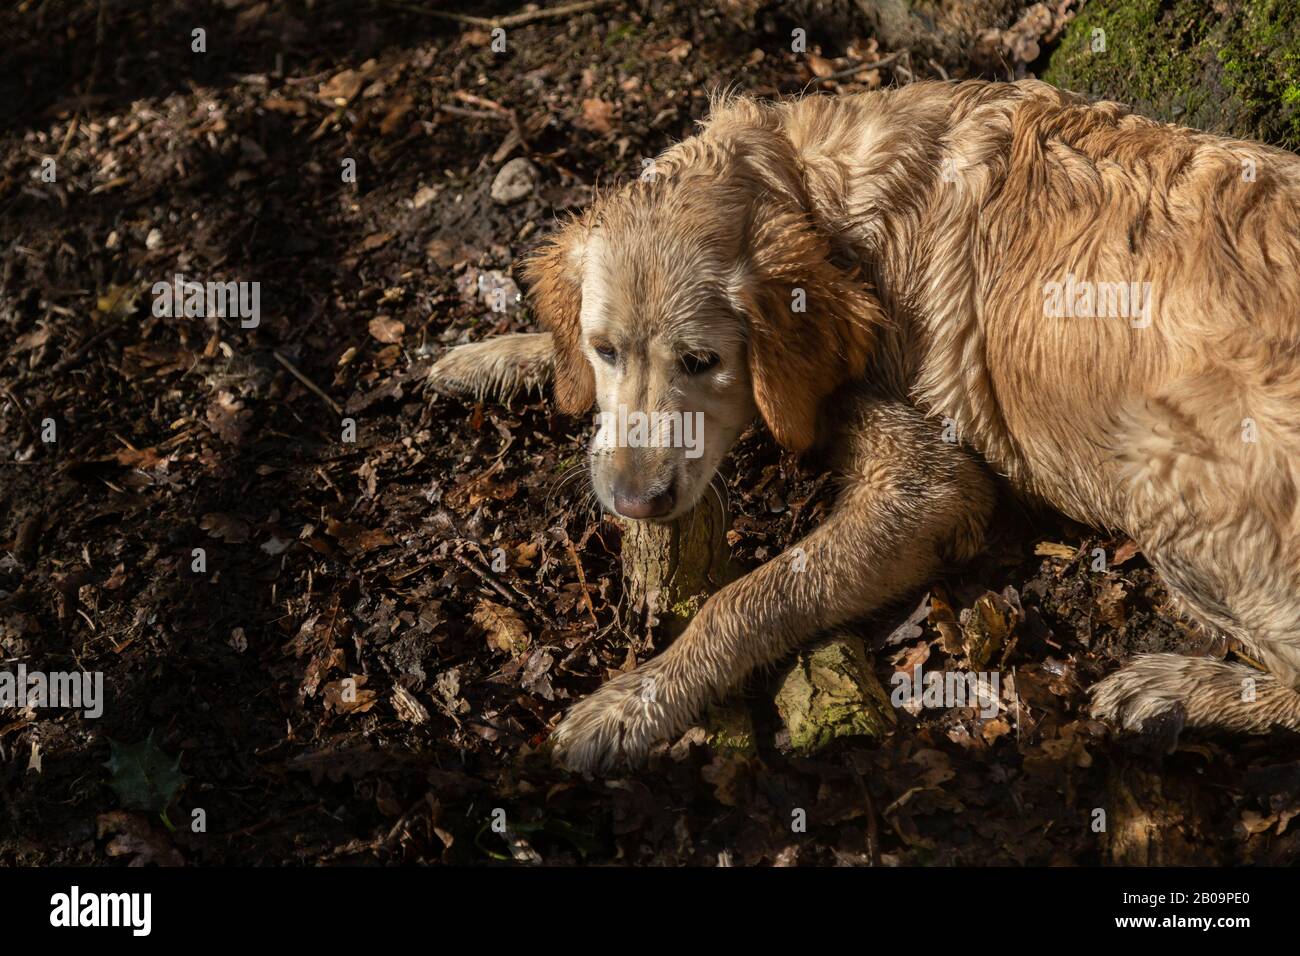 A muddy golden retriever puppy lies on the ground chewing a stick. Stock Photo